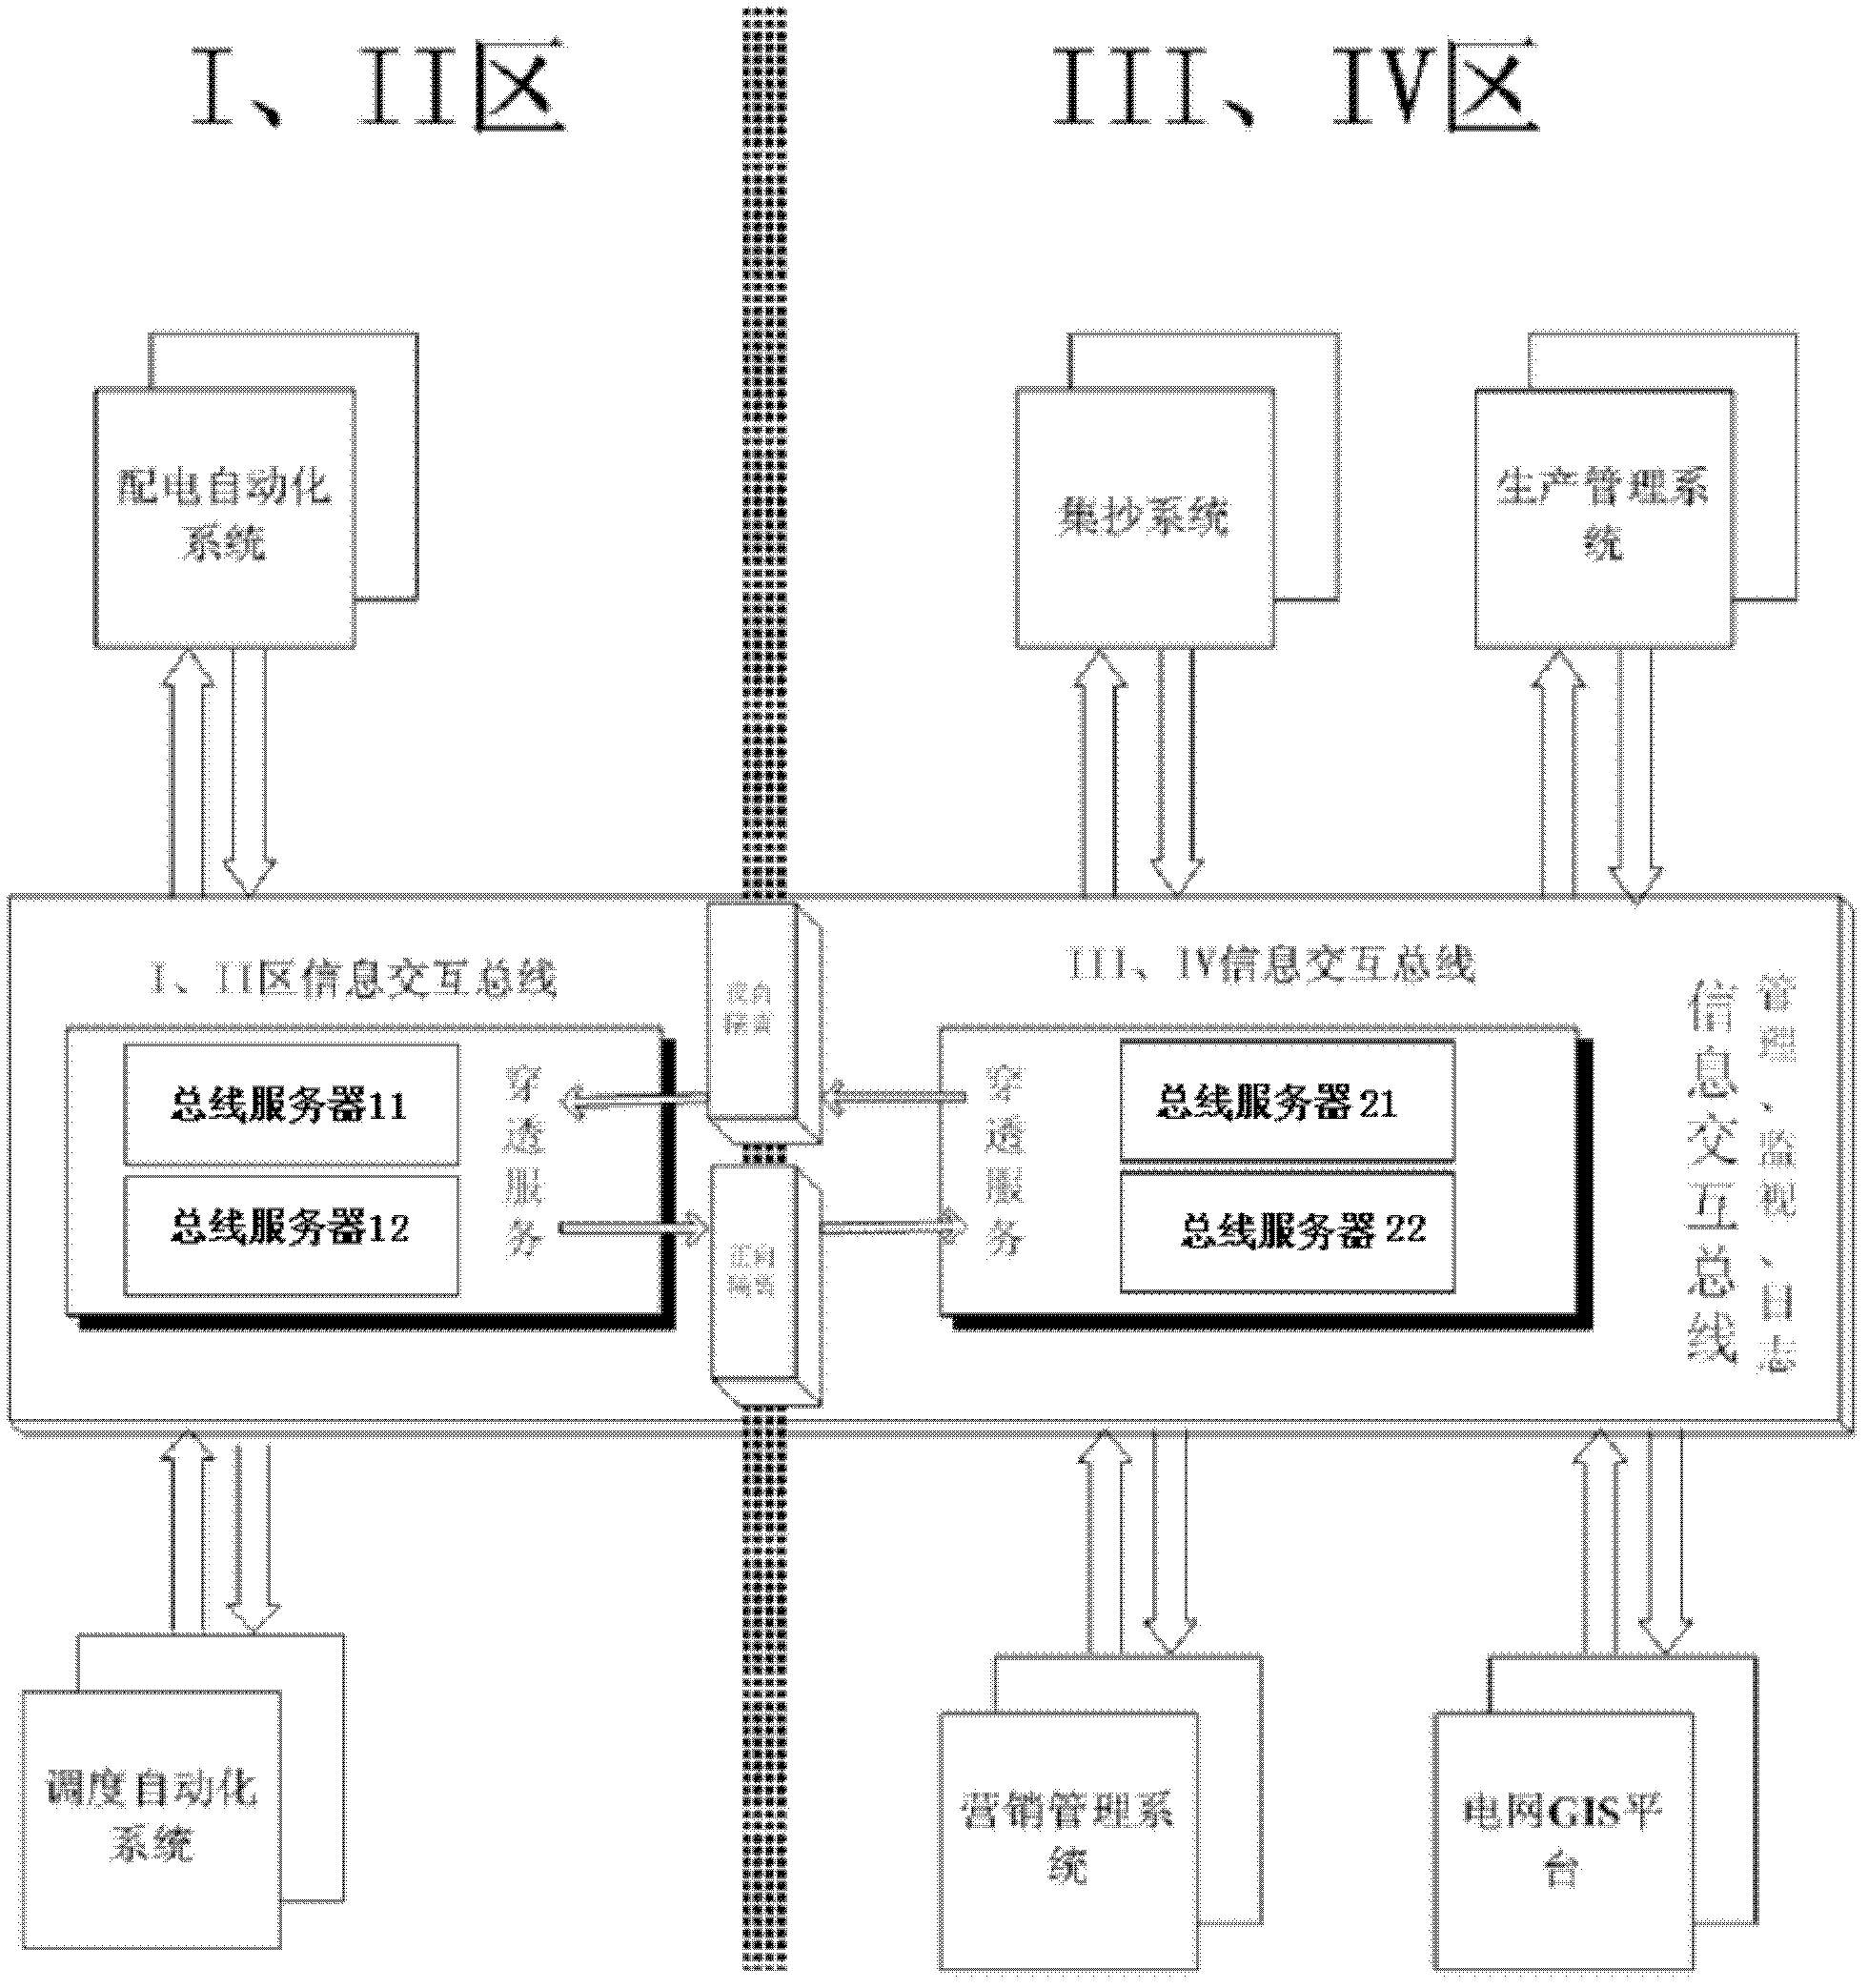 Method for implementing parameter synchronization of integrated power information buses